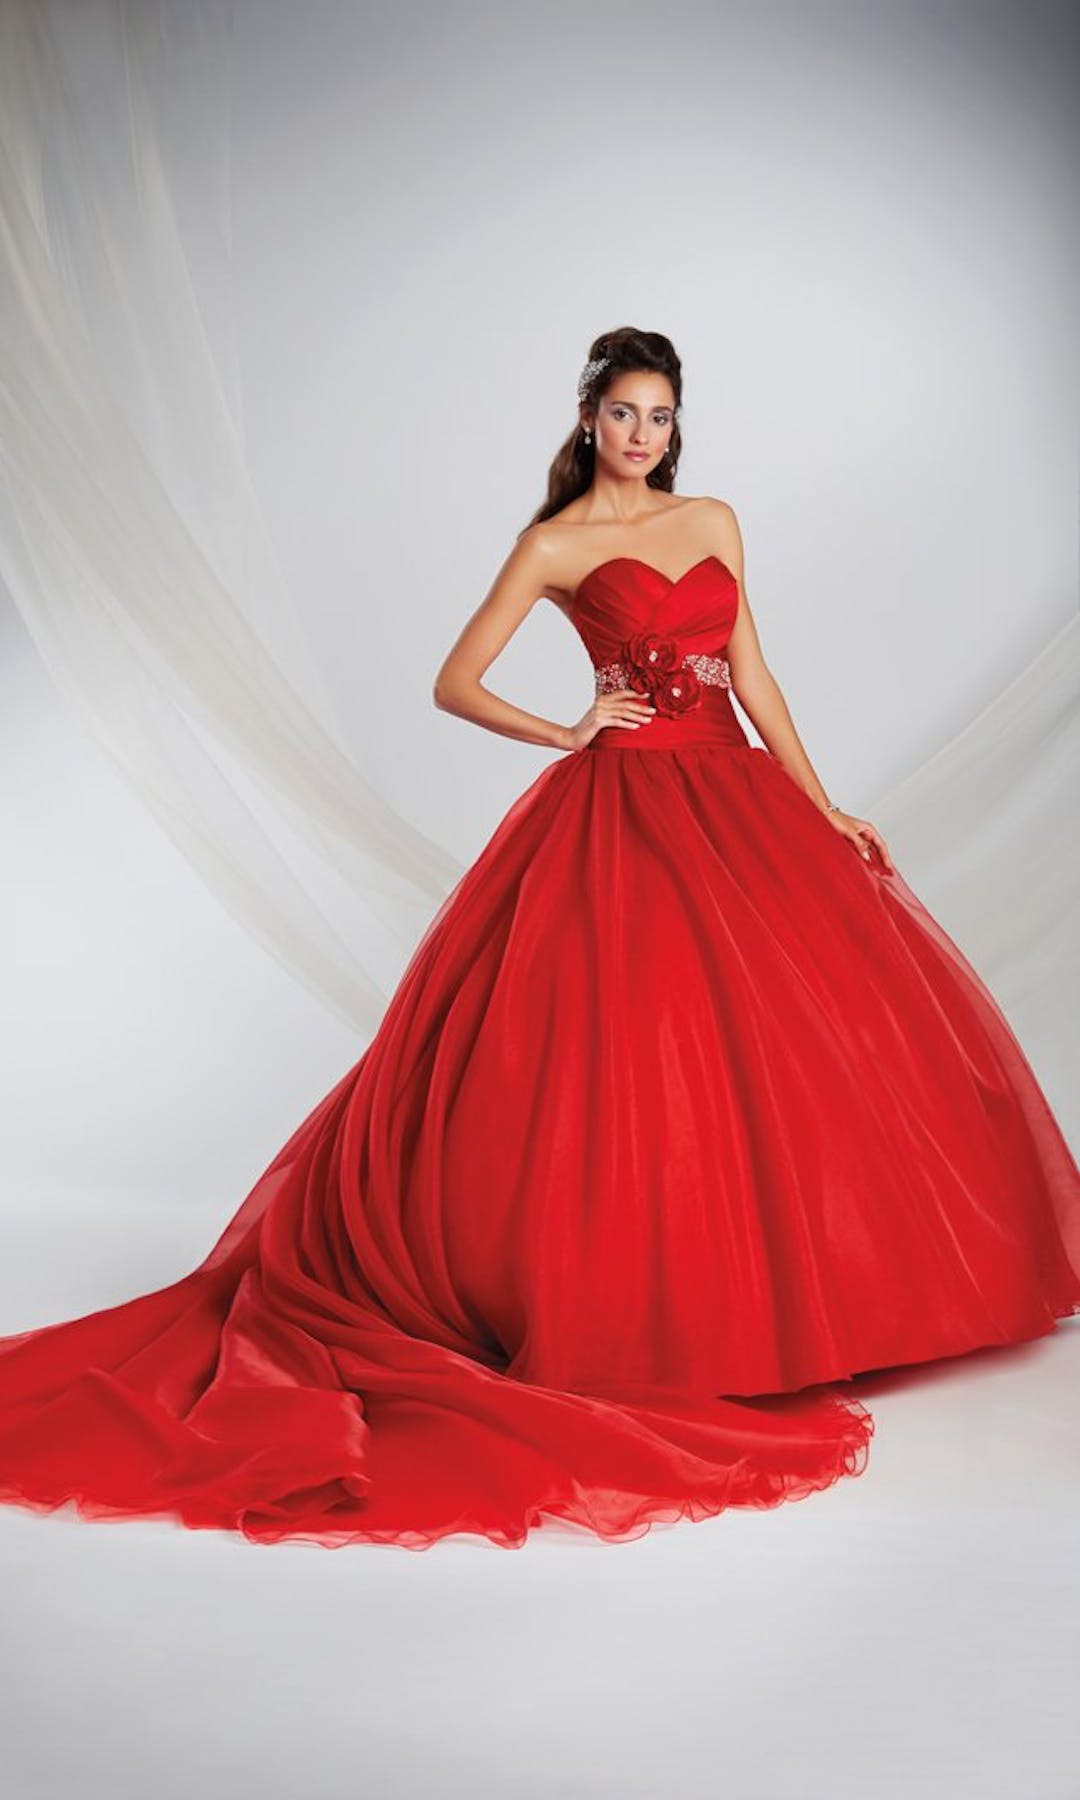 [For Rent ONLY] Snow White Disney Fairy Tale Wedding Dress in Sweet Scarlet (Ball Gown) - AA250 - Blossom Wedding